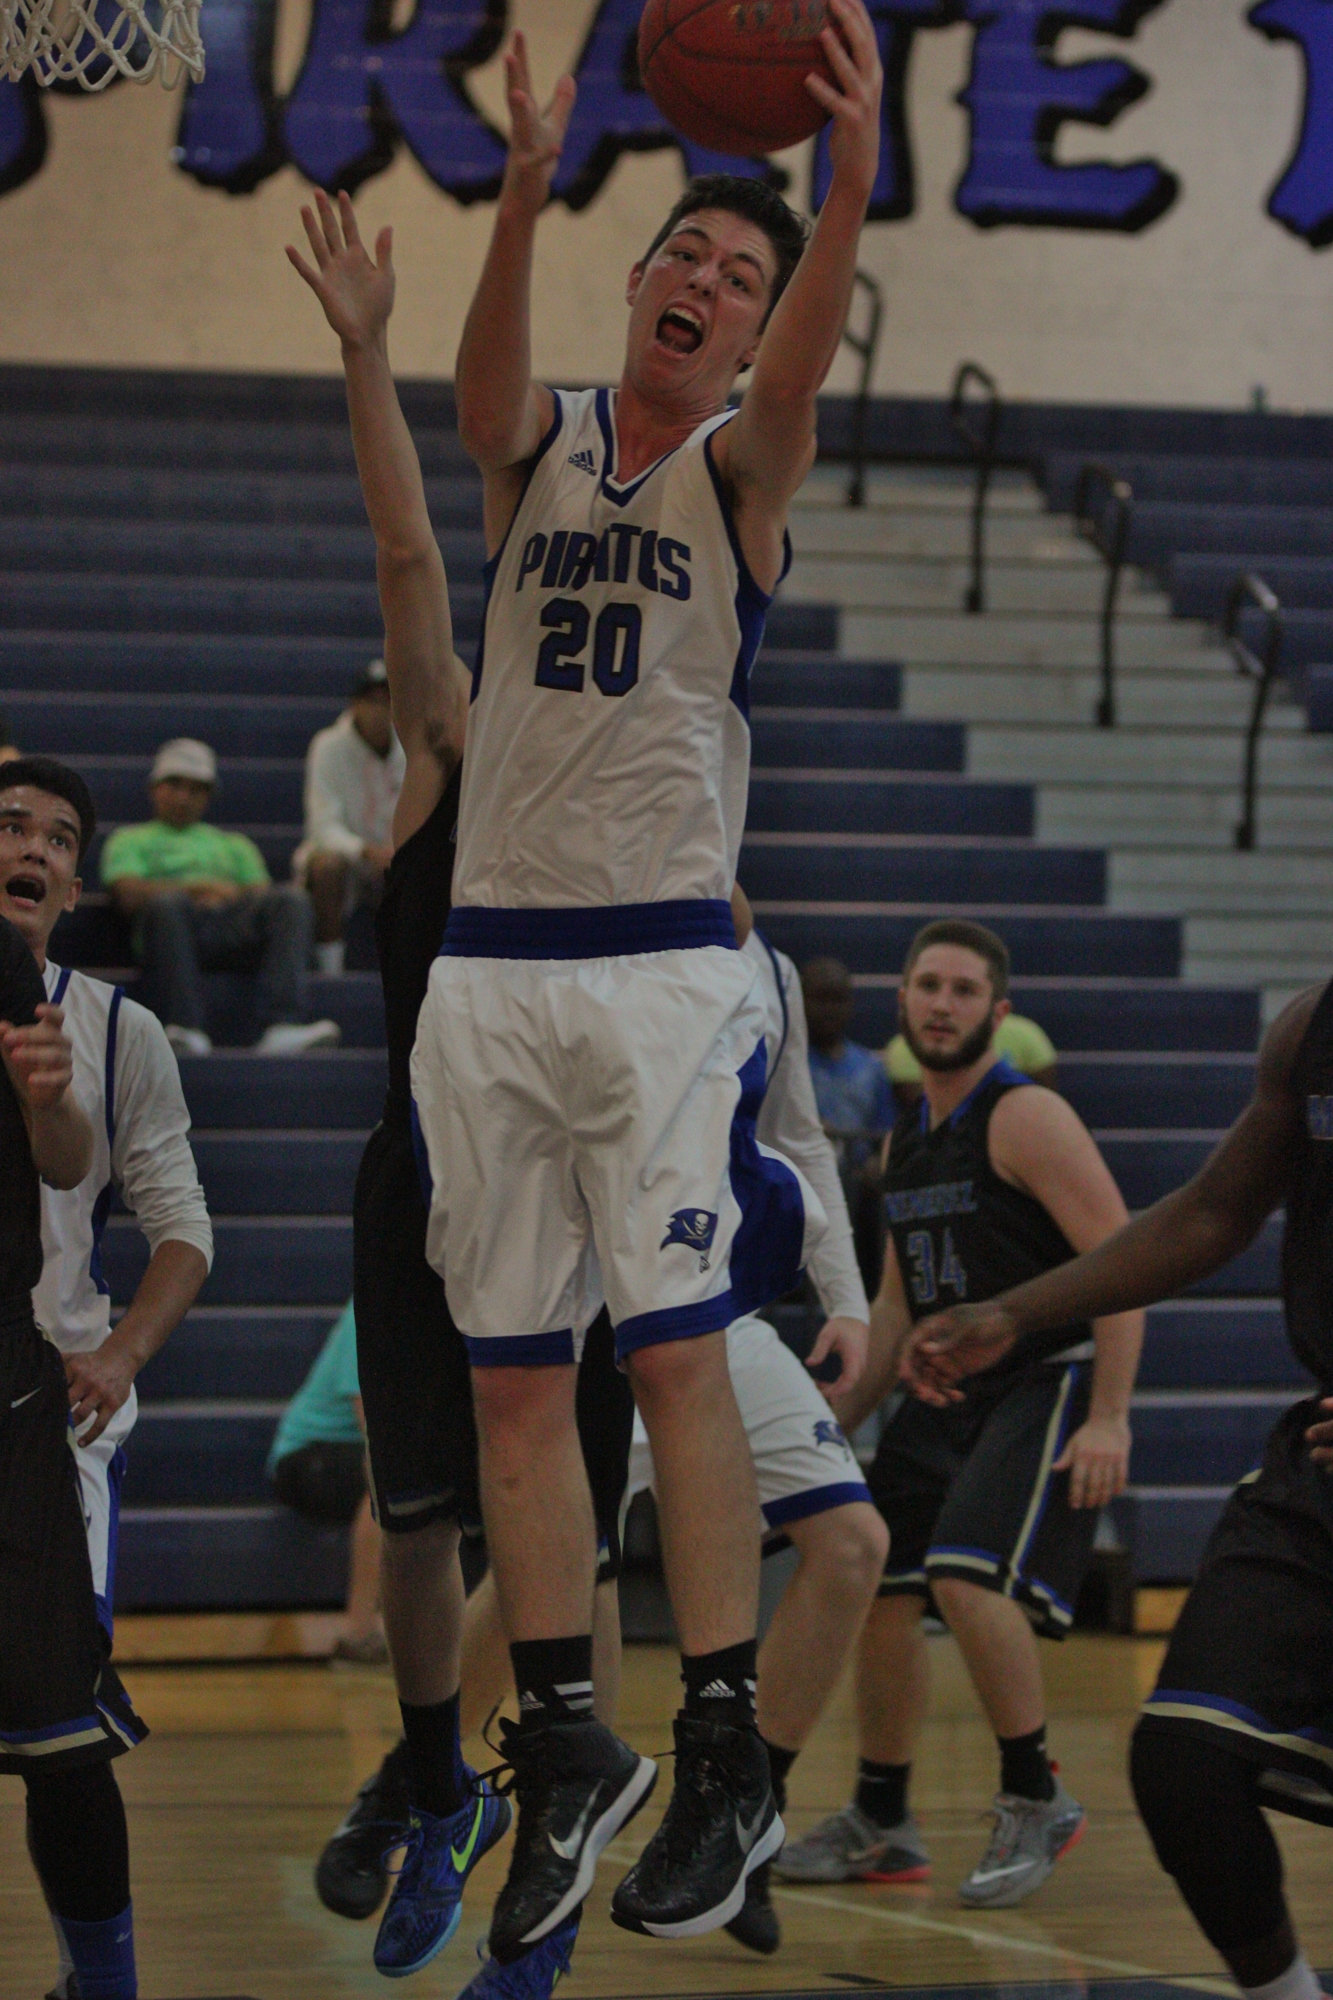 Cam Rees grabs a defensive rebound against Menendez. Photos by Jeff Dawsey